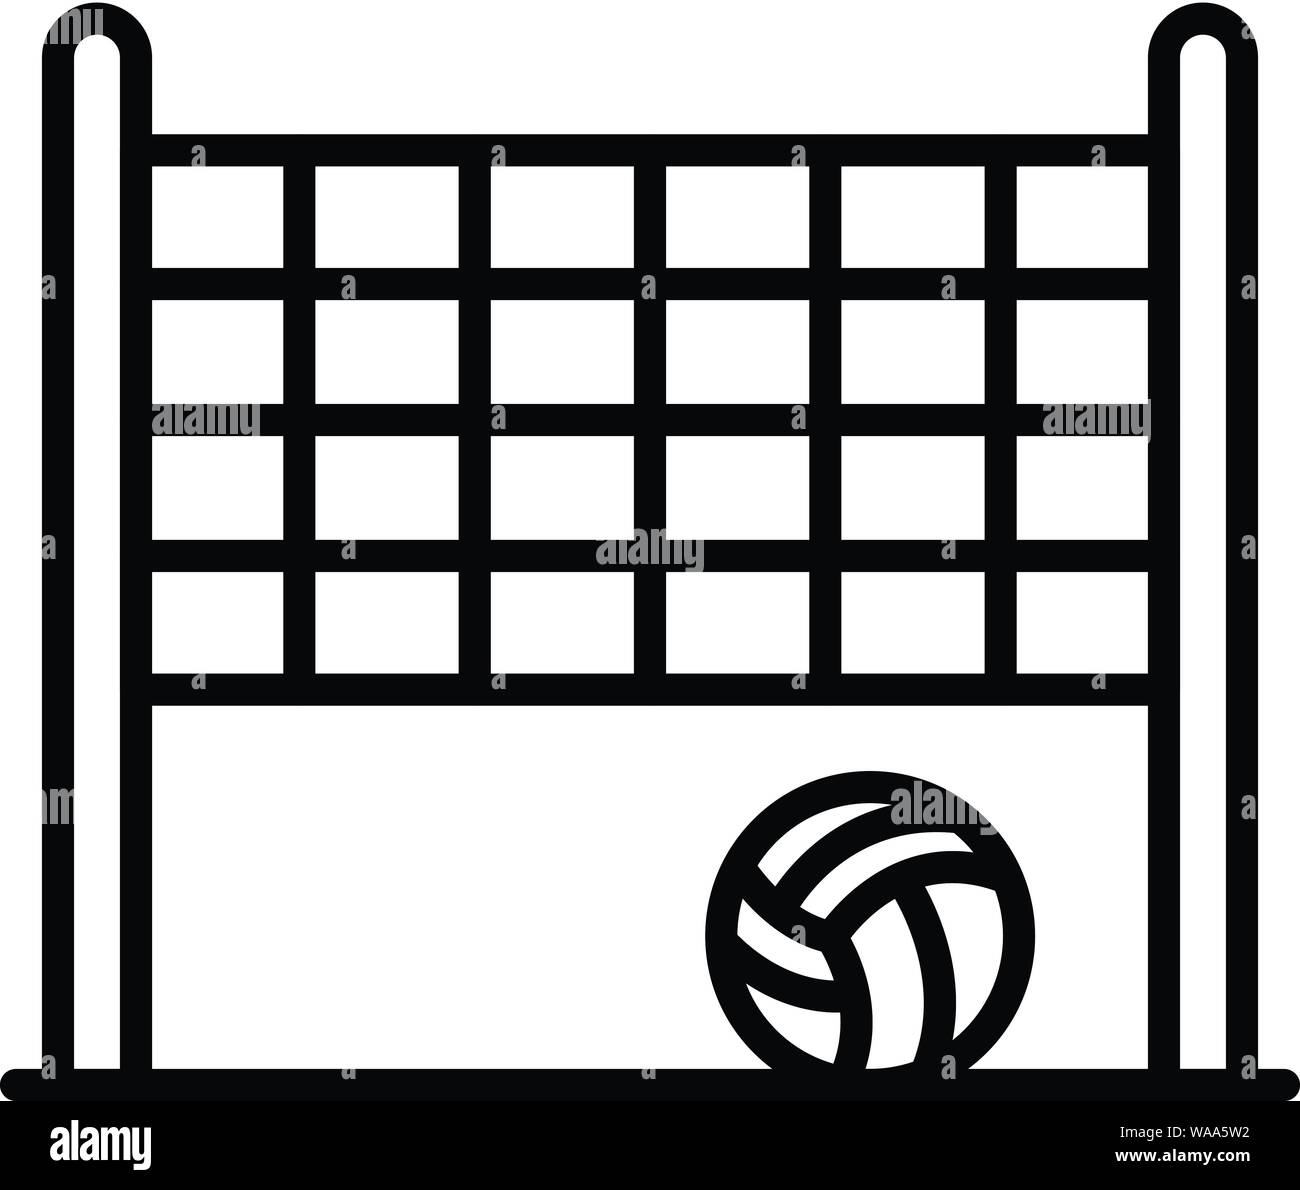 Brazil beach volleyball Stock Vector Images - Alamy